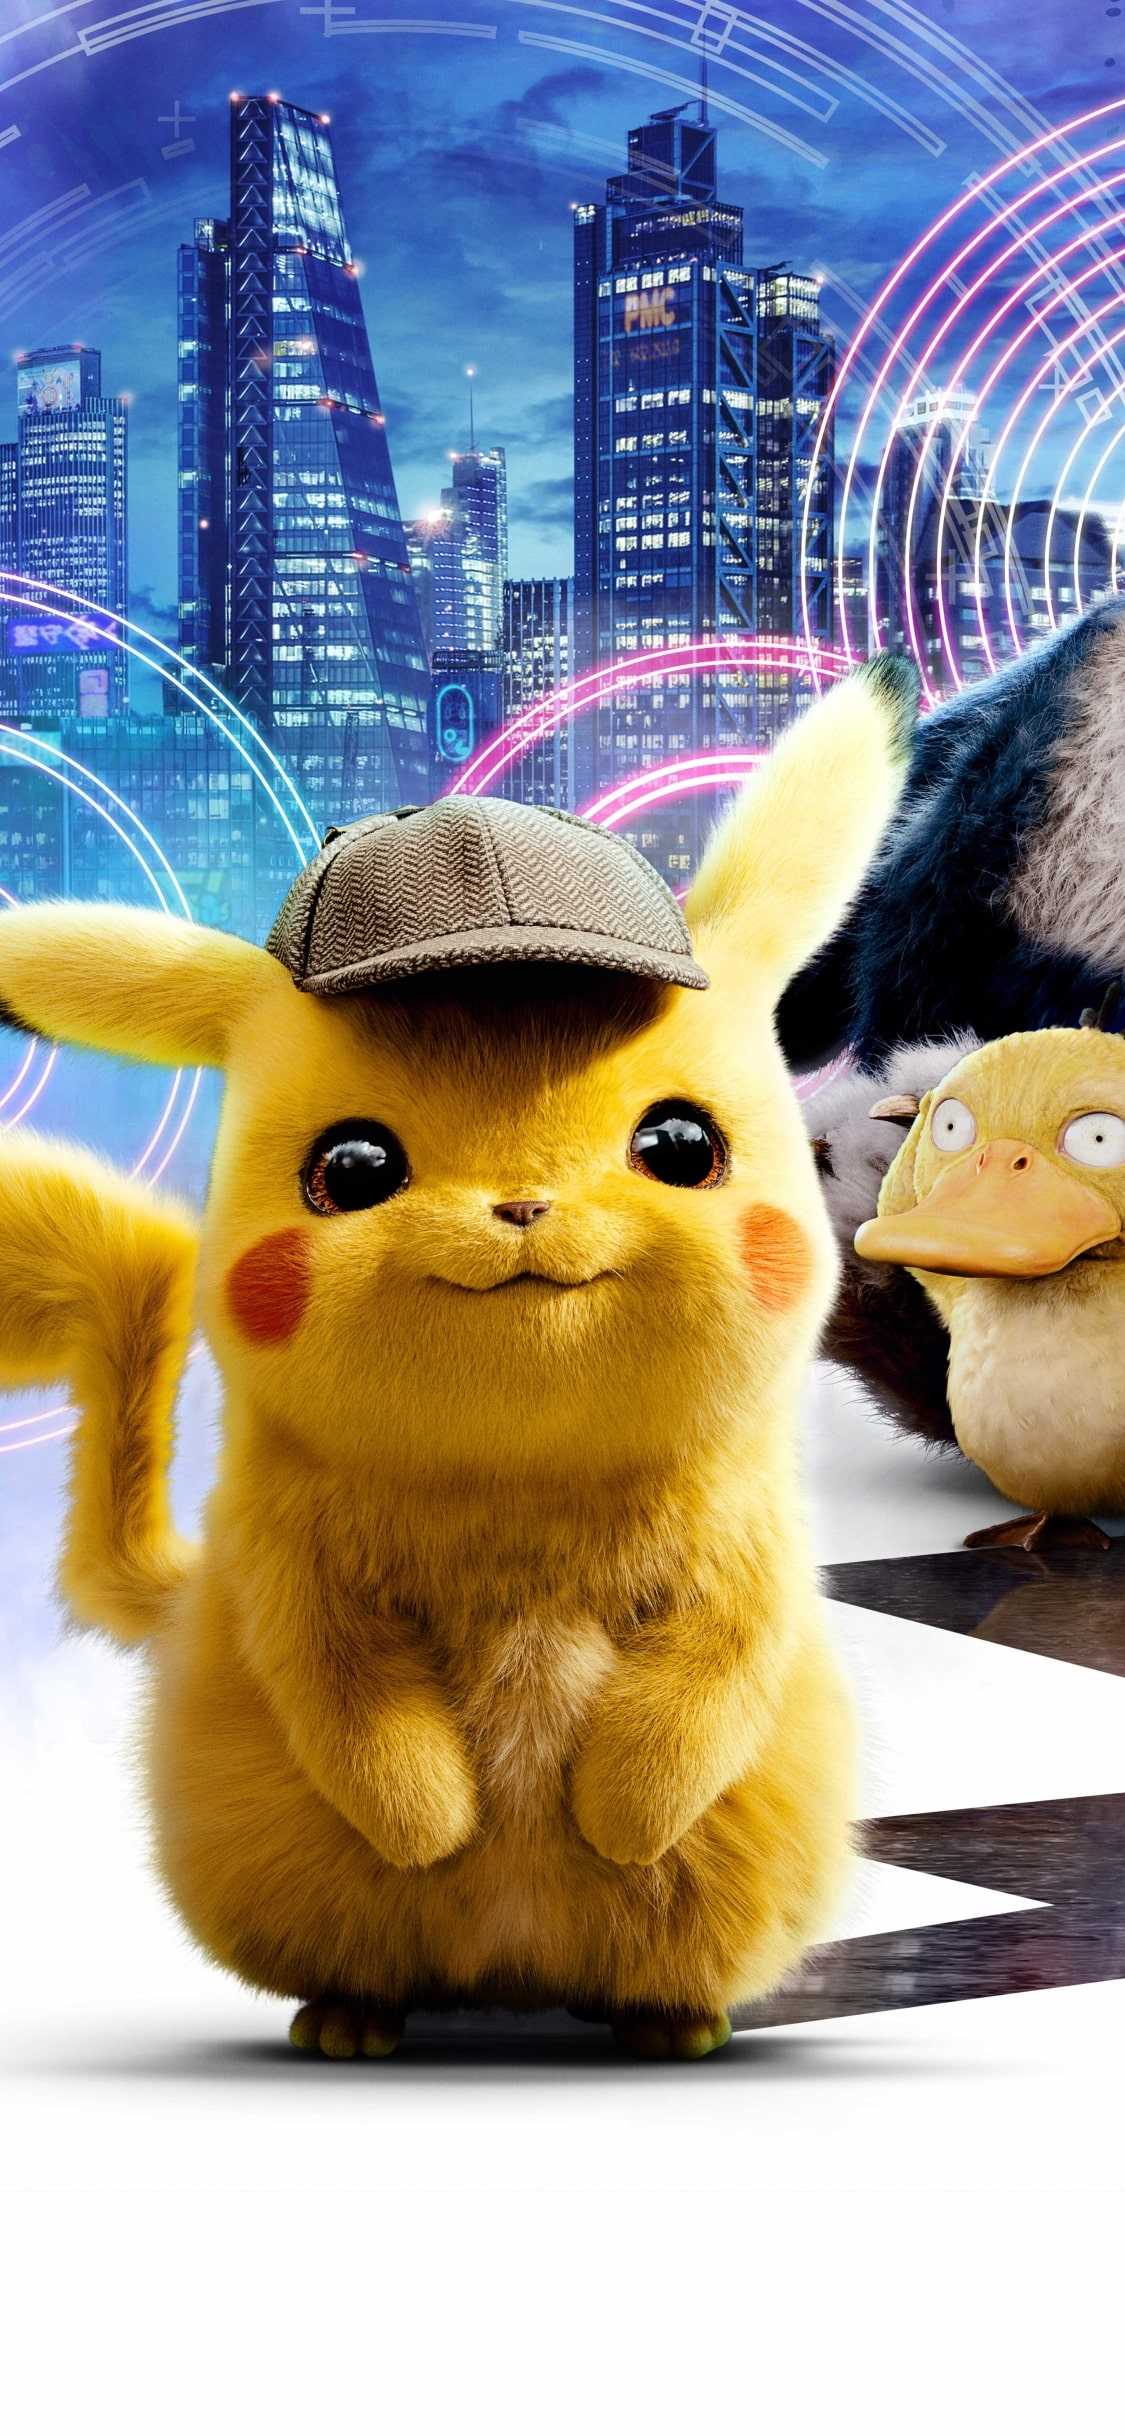 58 Pikachu Wallpapers HD 4K 5K for PC and Mobile  Download free images  for iPhone Android